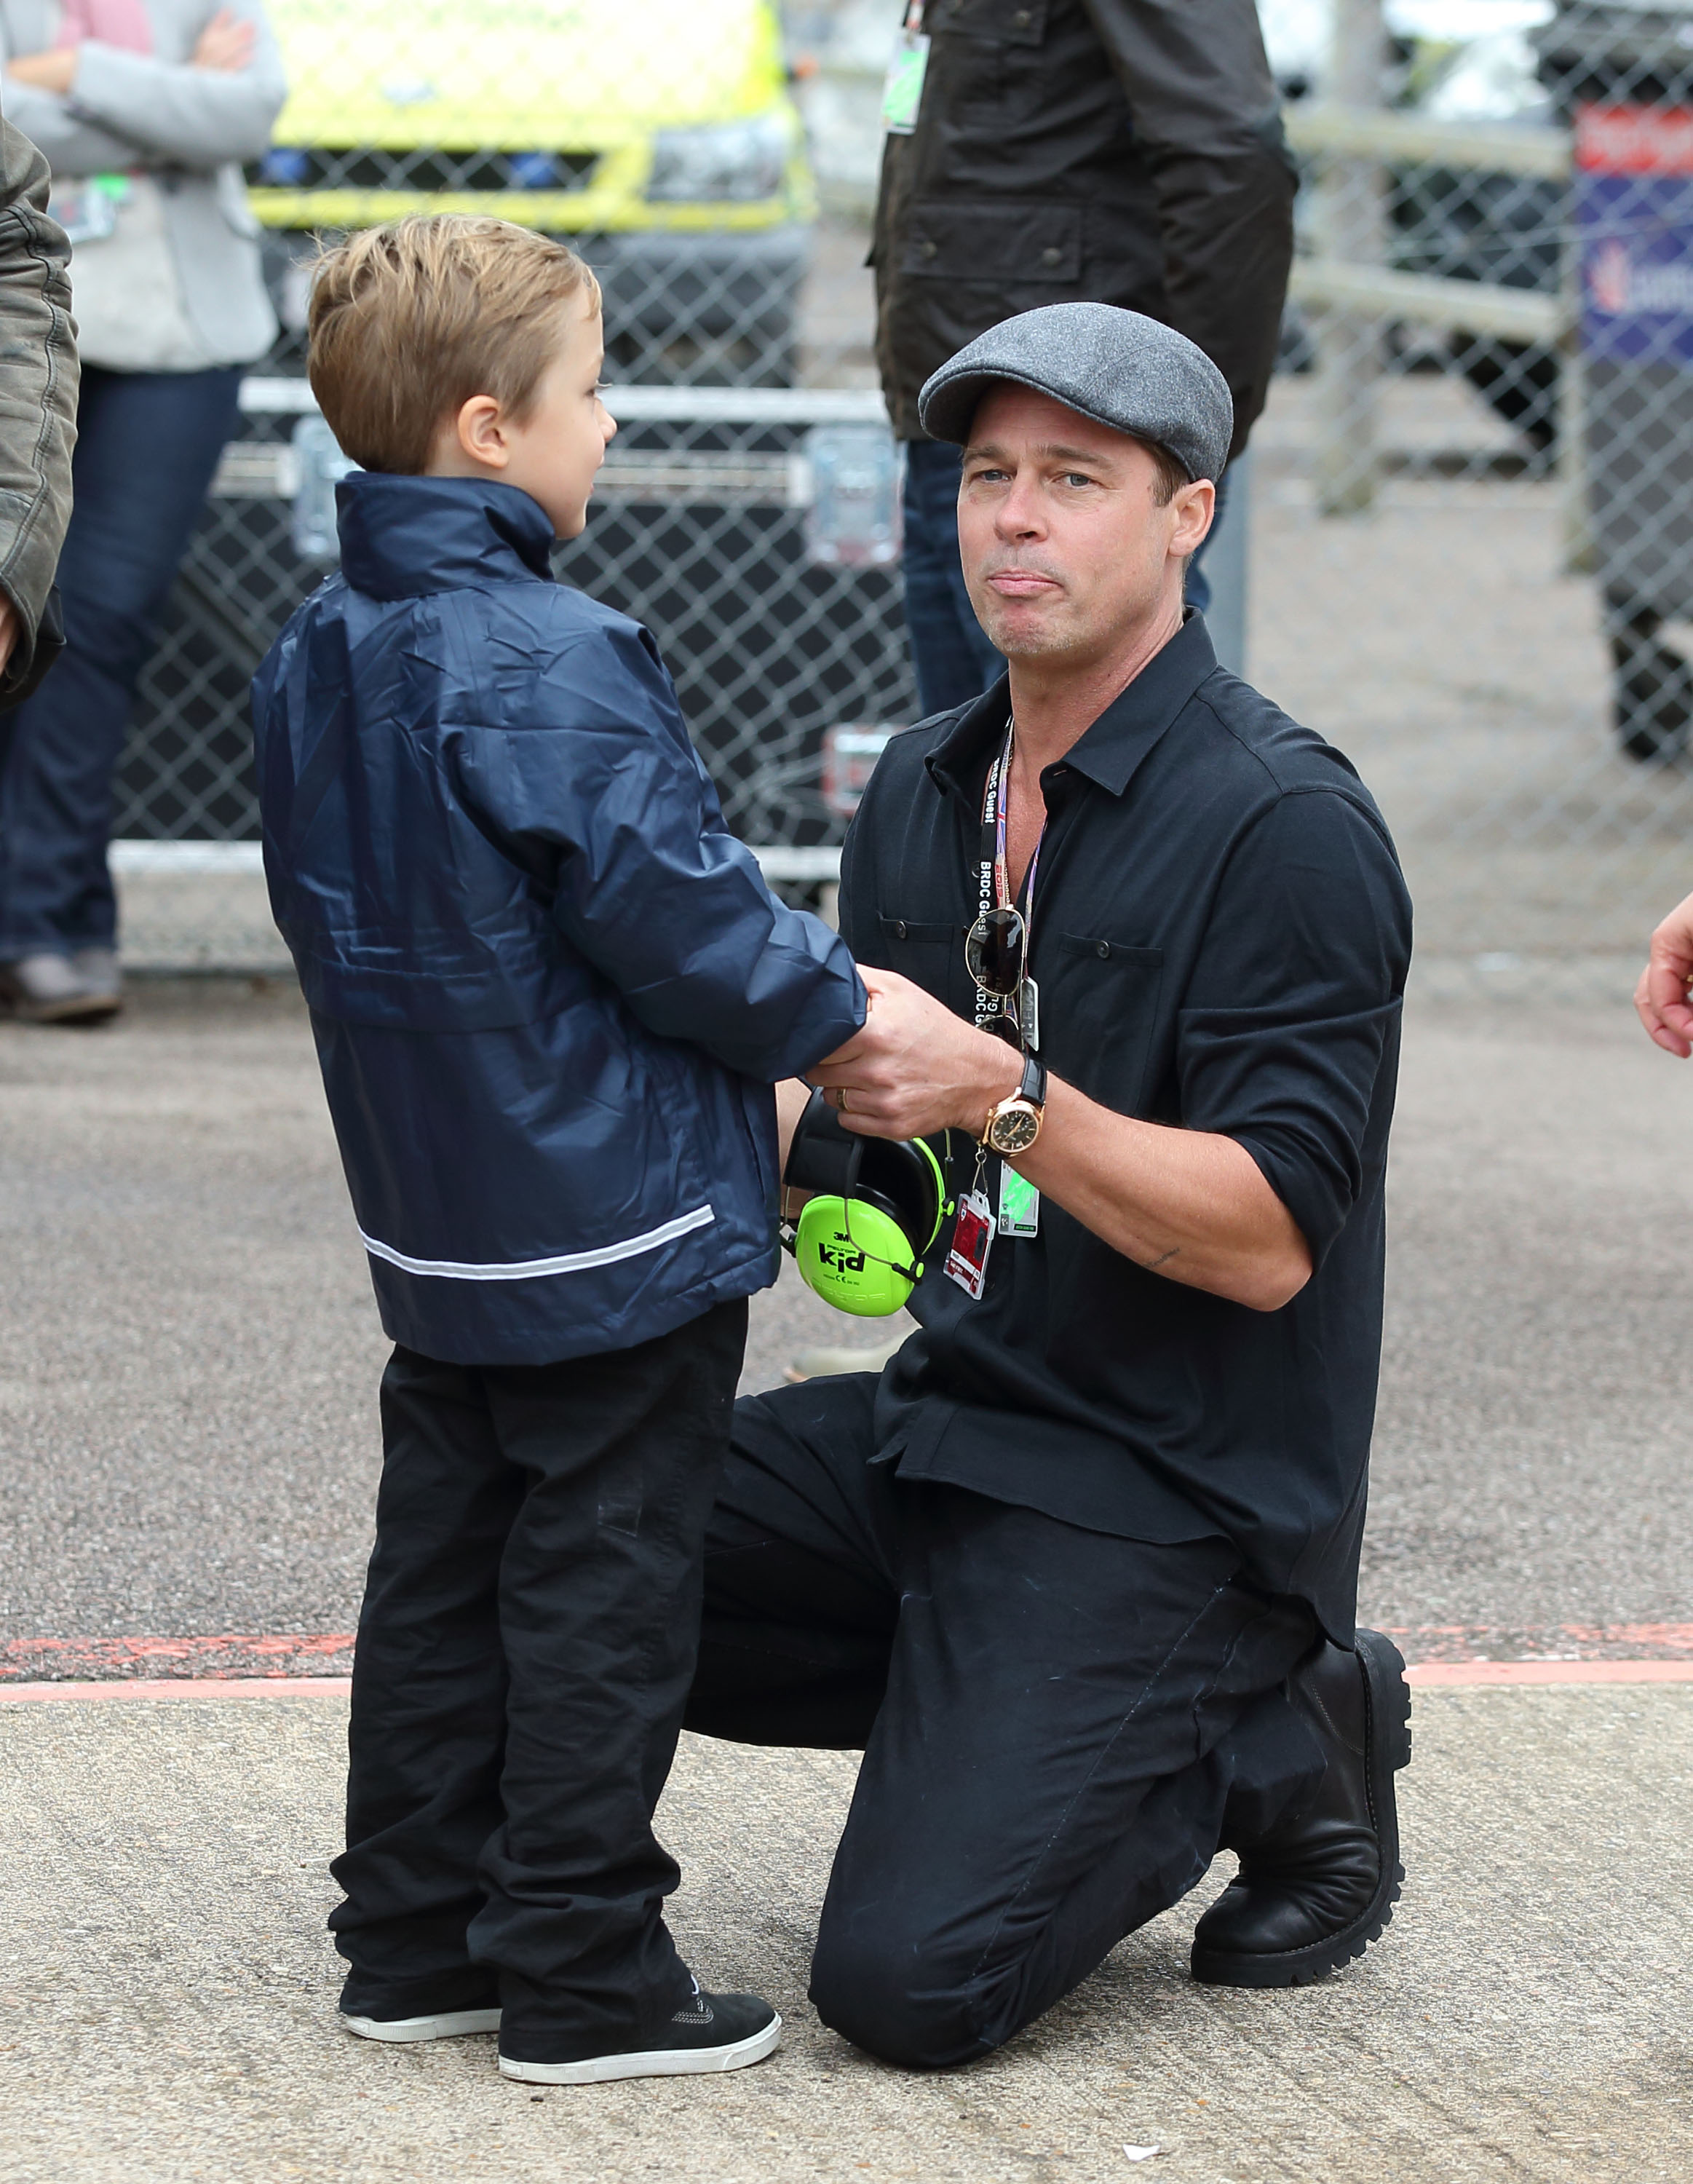 Brad Pitt and his son Knox Jolie-Pitt at the MotoGP British Grand Prix race on August 30, 2015, in Northampton, England | Source: Getty Images